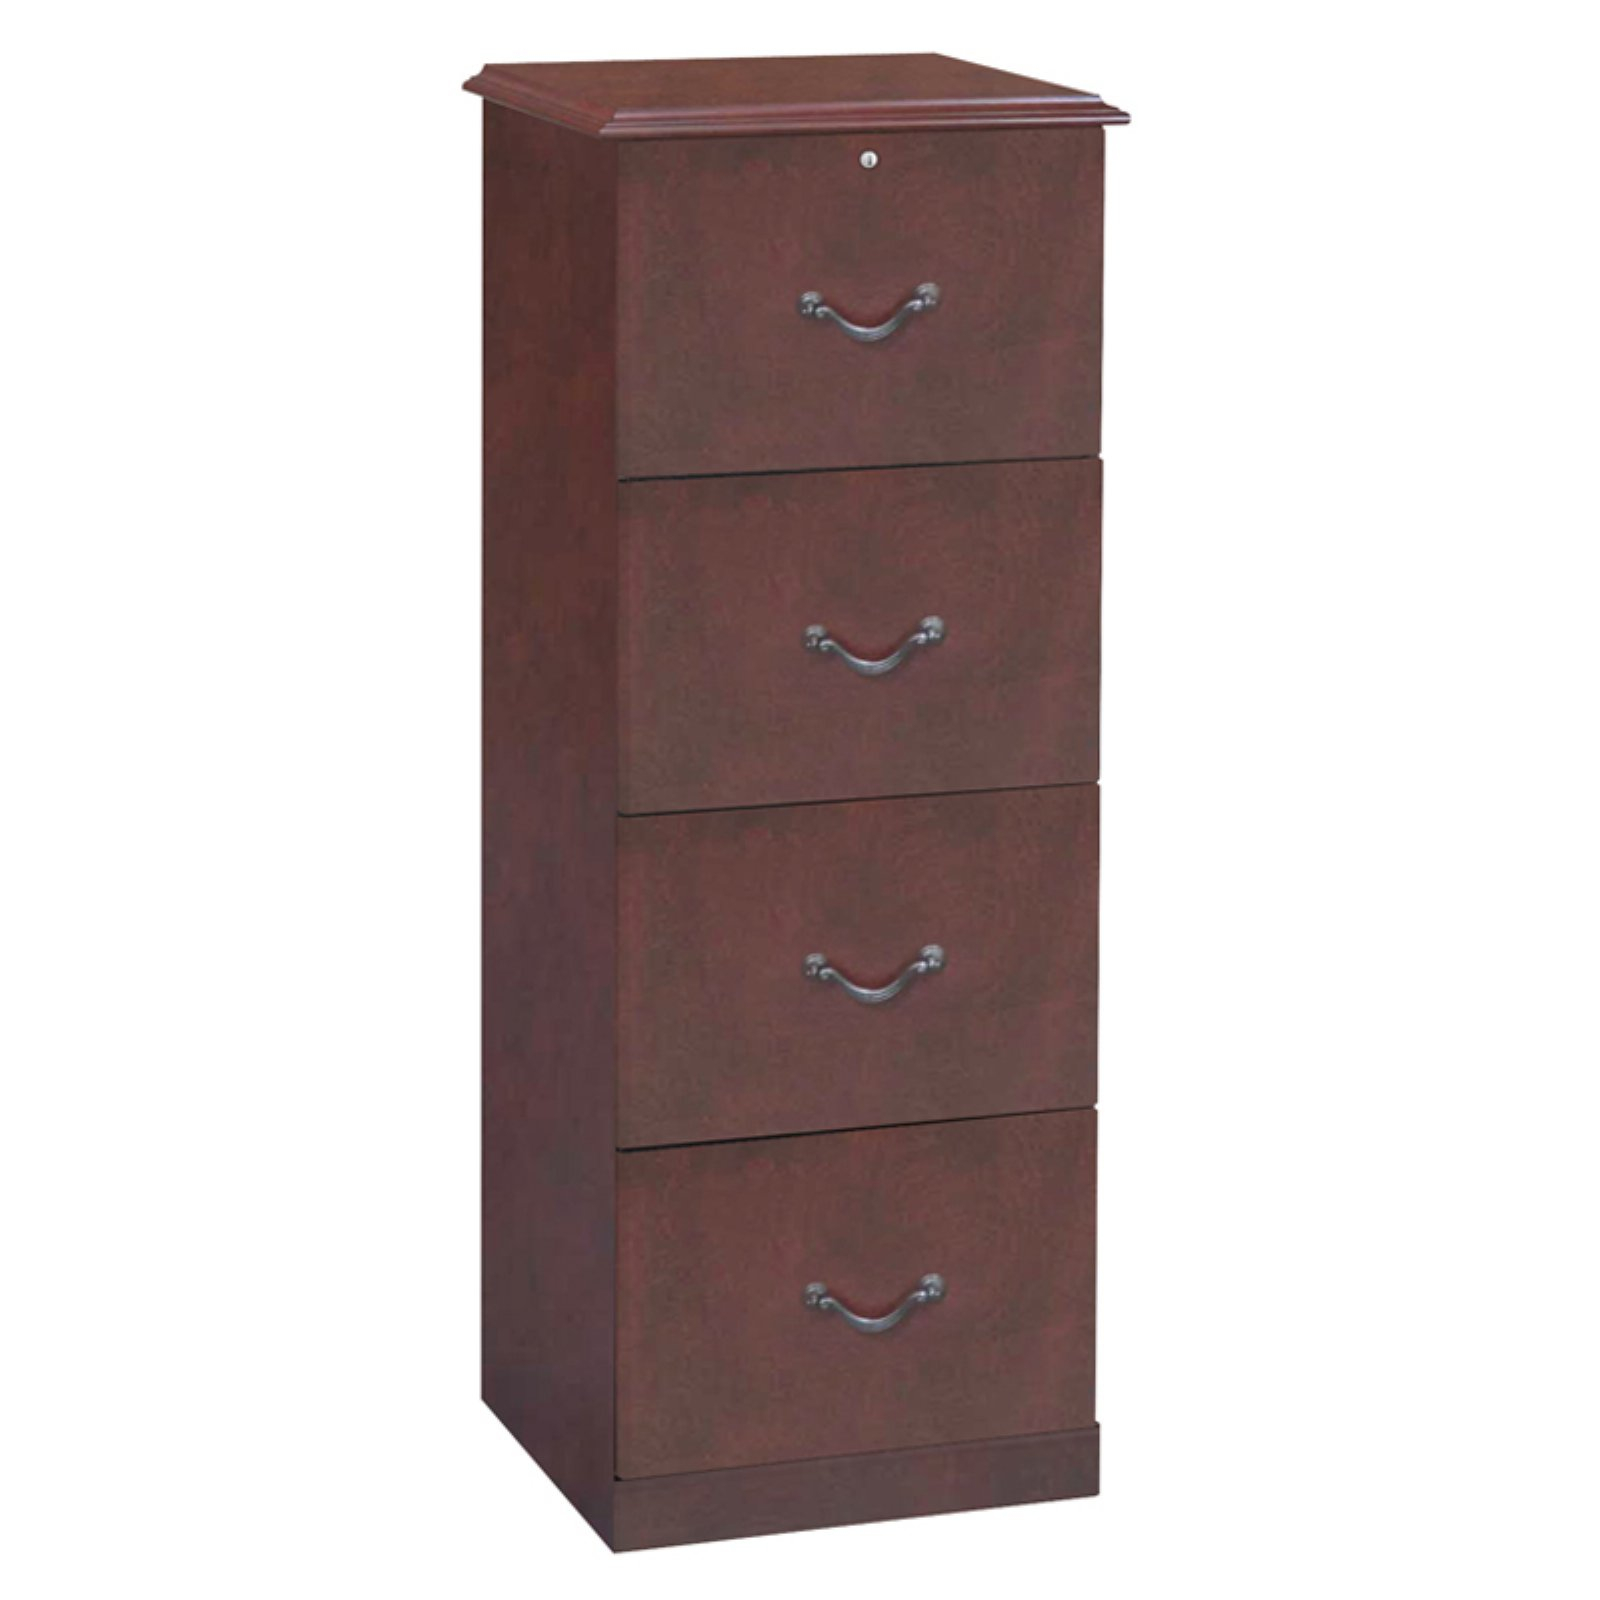 4 Drawer Vertical Wood Lockable Filing Cabinet Cherry Walmart in dimensions 1600 X 1600